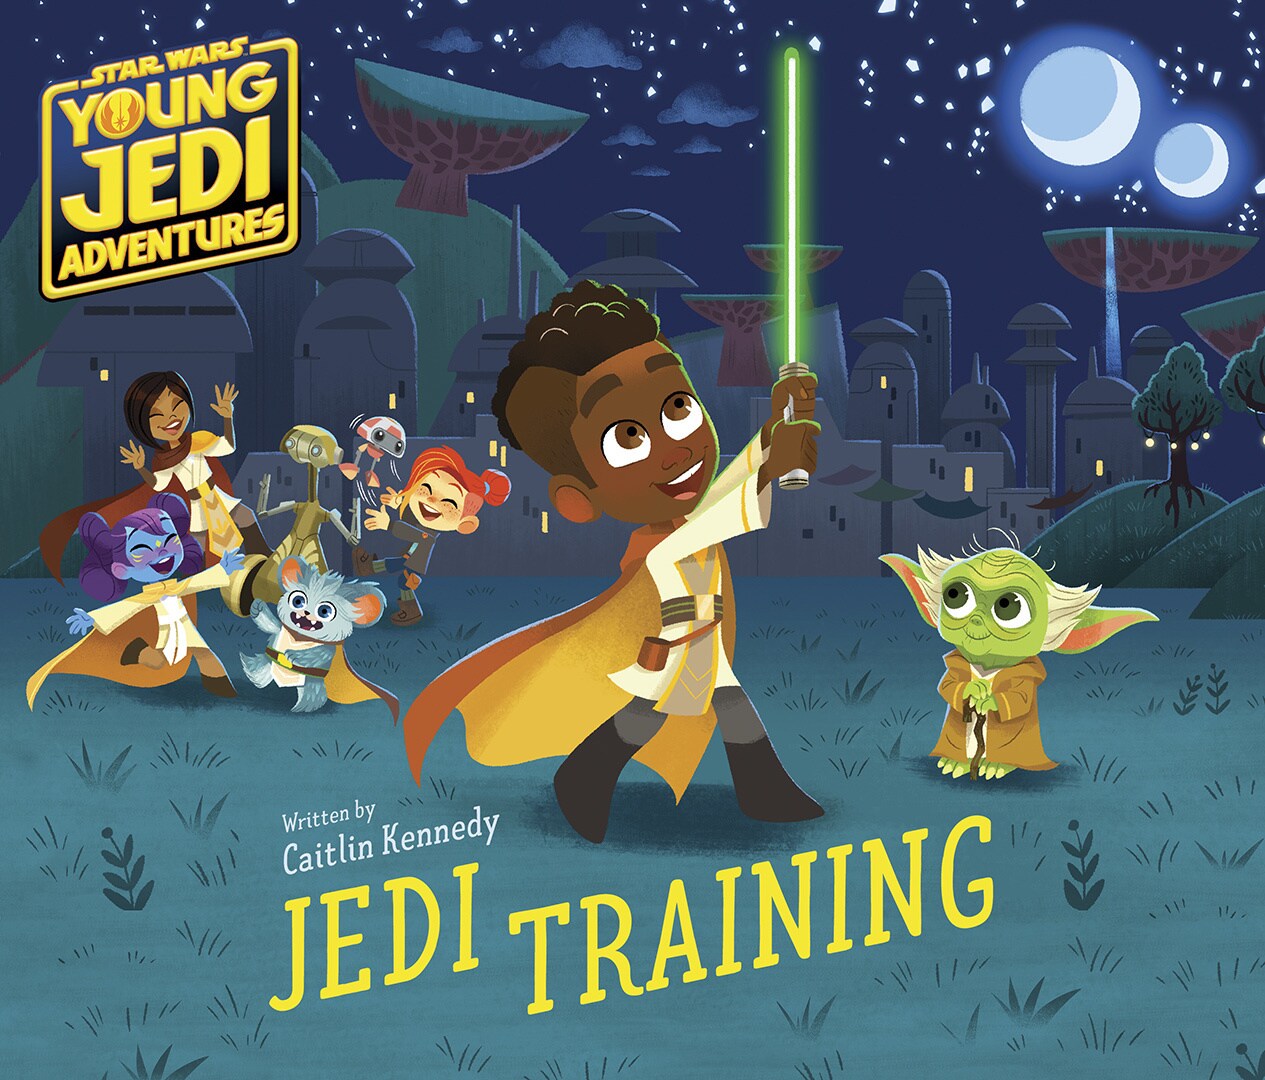 Everything we know about Star Wars: Young Jedi Adventures